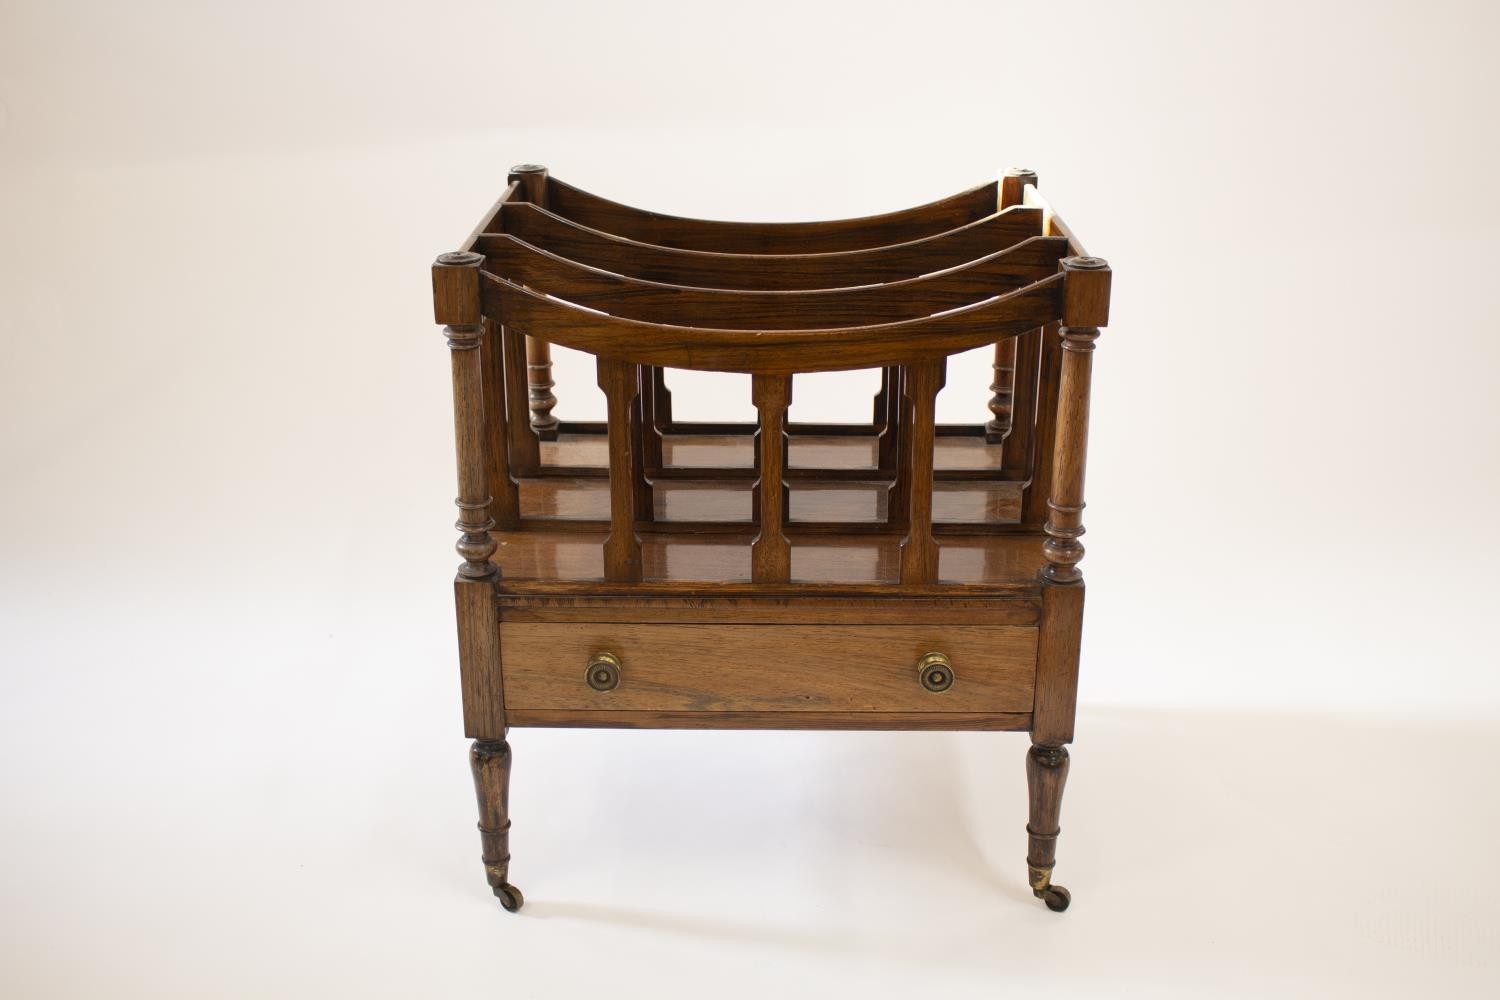 A George III Mahogany Canterbury. Circa 1800.Of typical form. Fitted with a single frieze drawer.